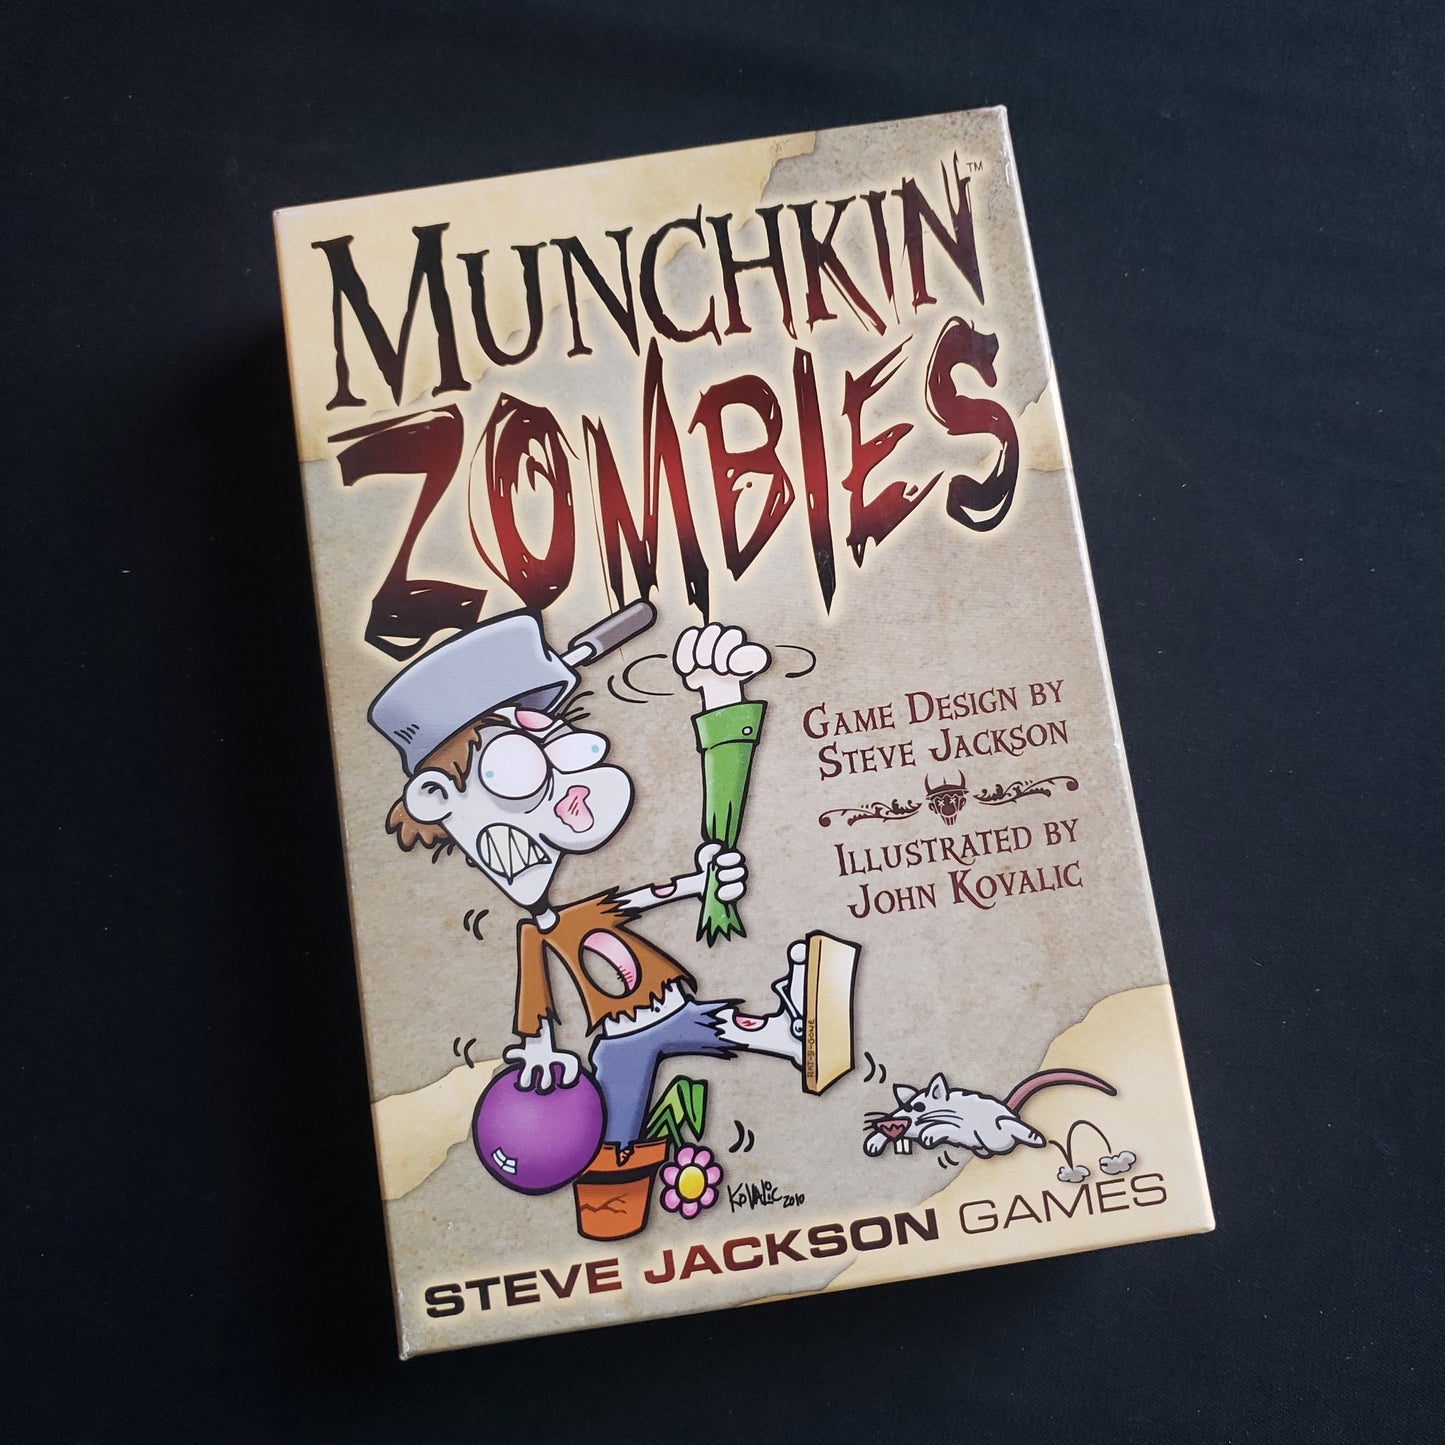 Image shows the front cover of the box of the Munchkin Zombies card game